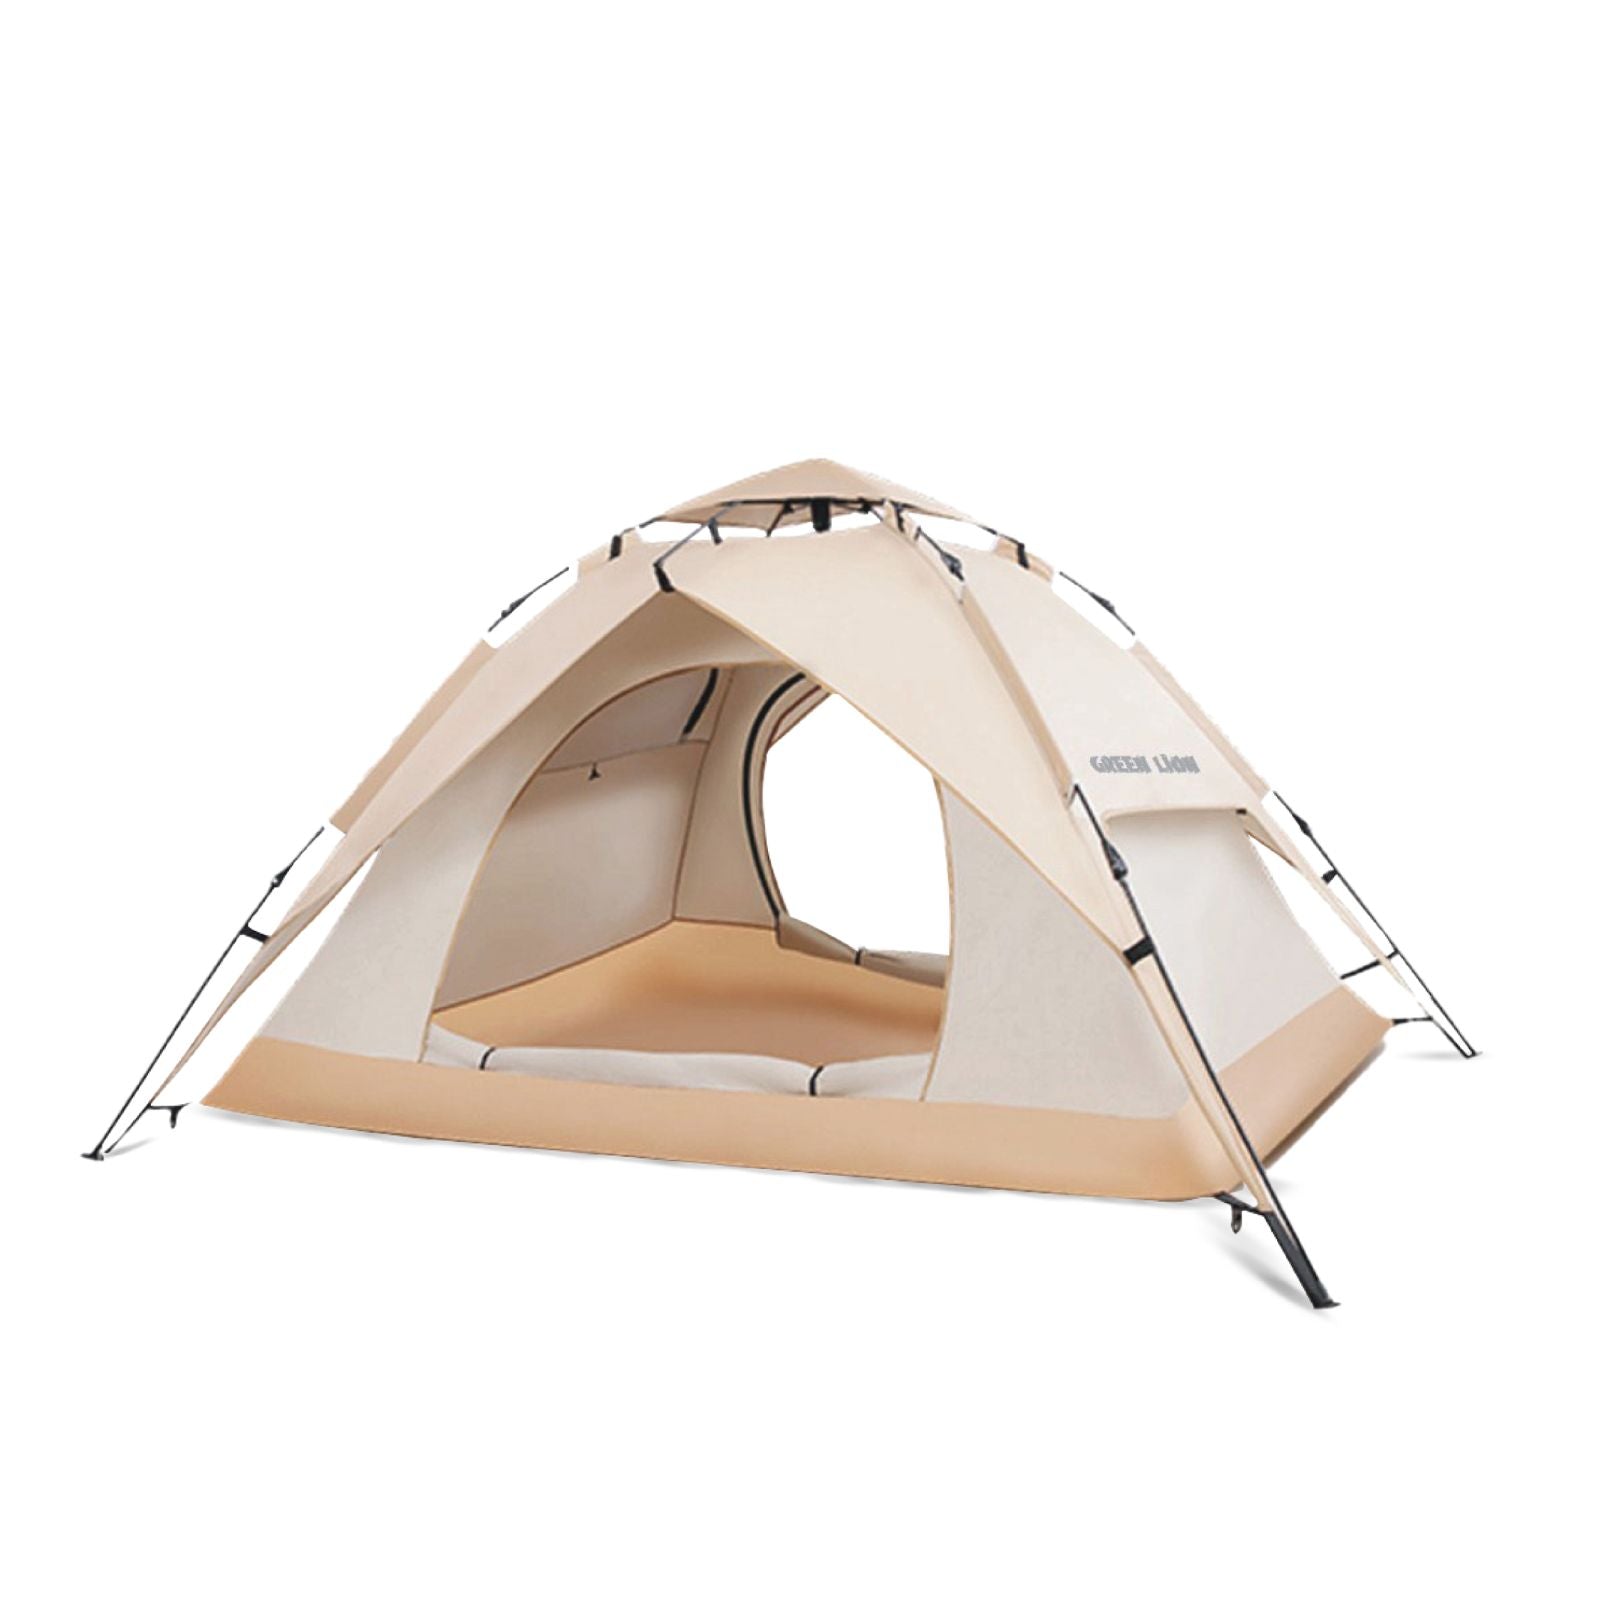 Green Lion Camping Tent 3-4 People GT-3 GL-T022 - Beige